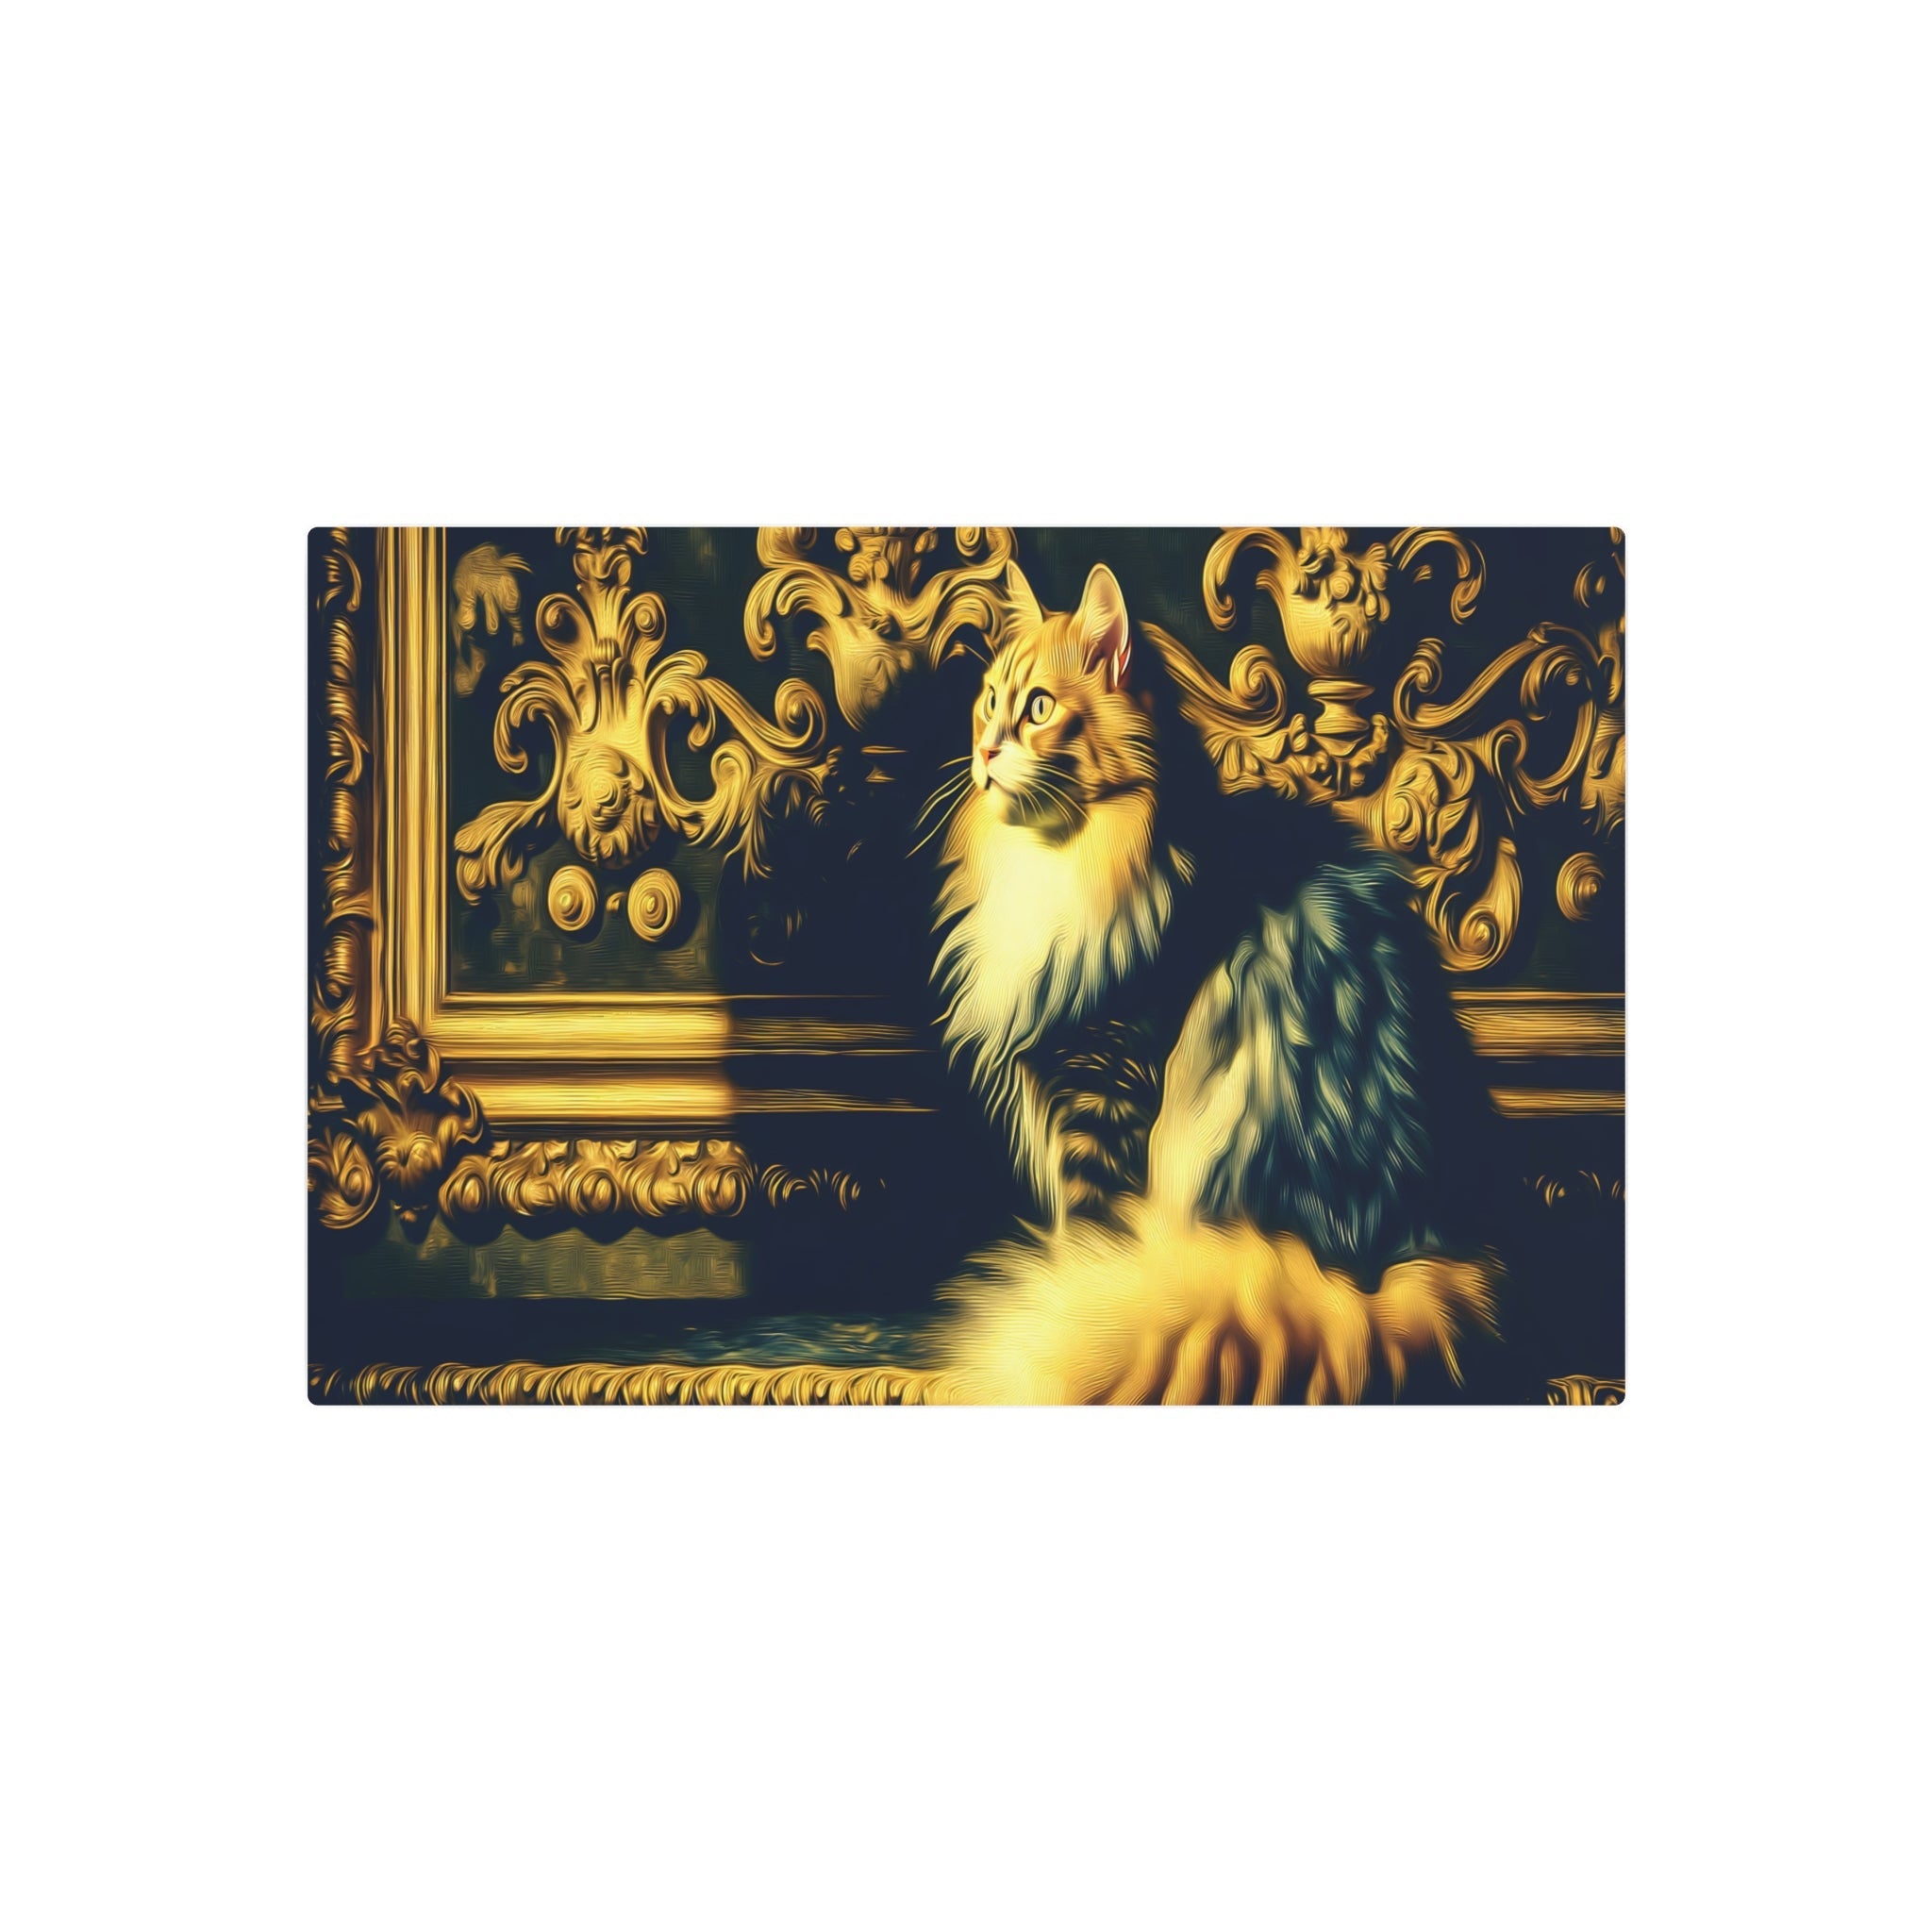 Metal Poster Art | "Baroque Art Inspired Royal Cat Image - Western Styles with Dramatic Lighting and Opulent Decoration" - Metal Poster Art 30″ x 20″ (Horizontal) 0.12''